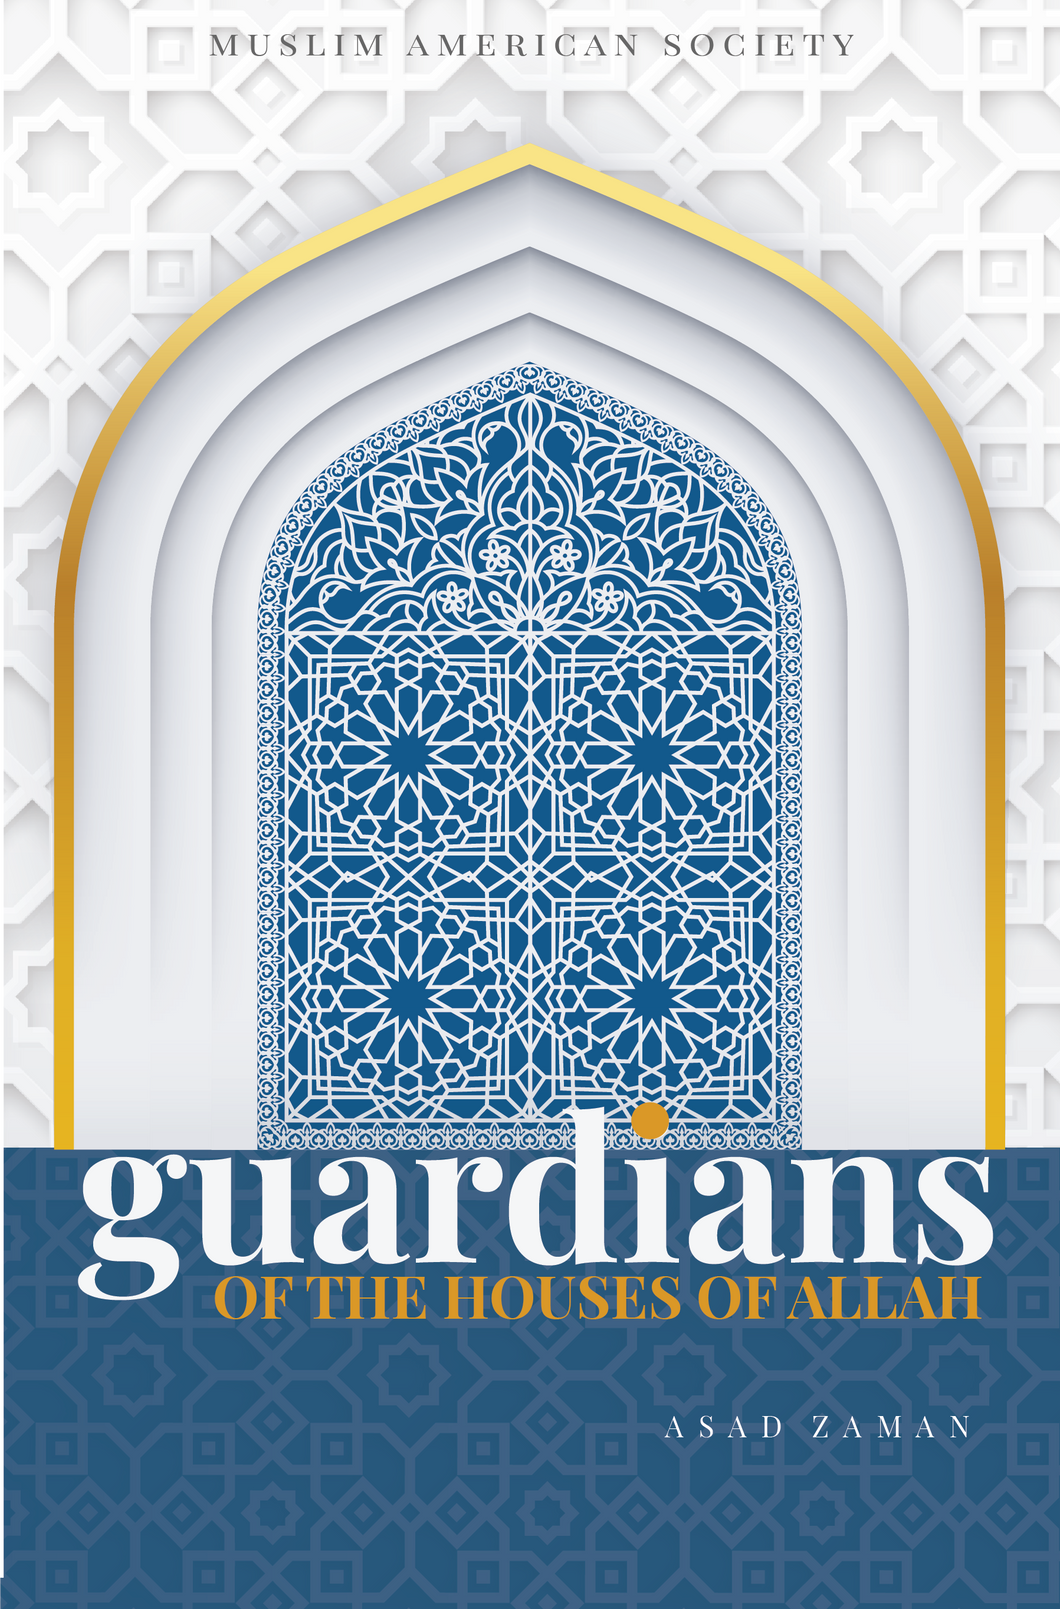 Guardians of the Houses of Allah